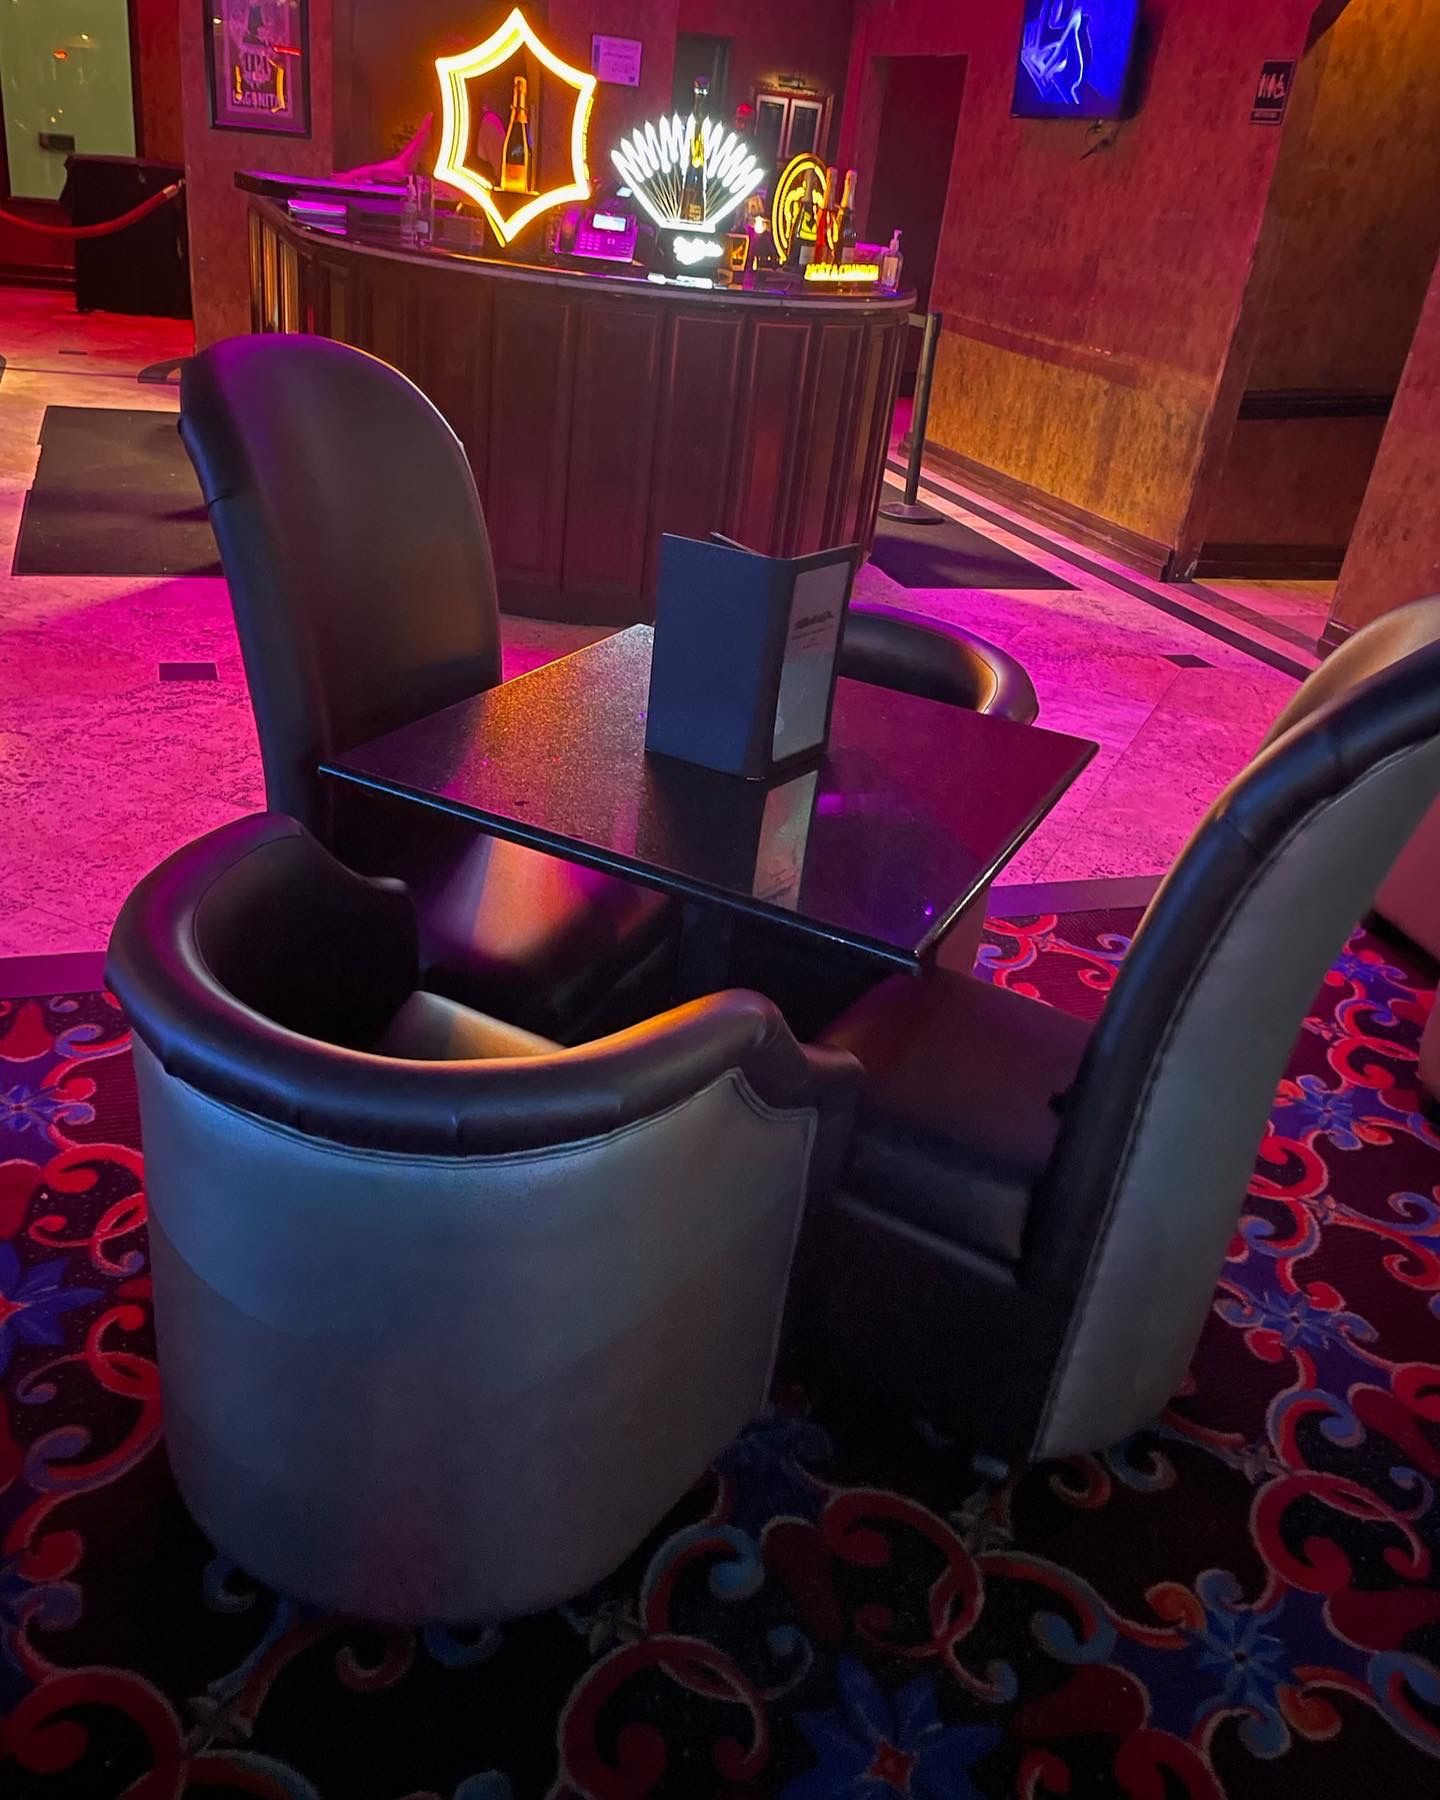 tables with dining and parlor chairs around them in a nightclub